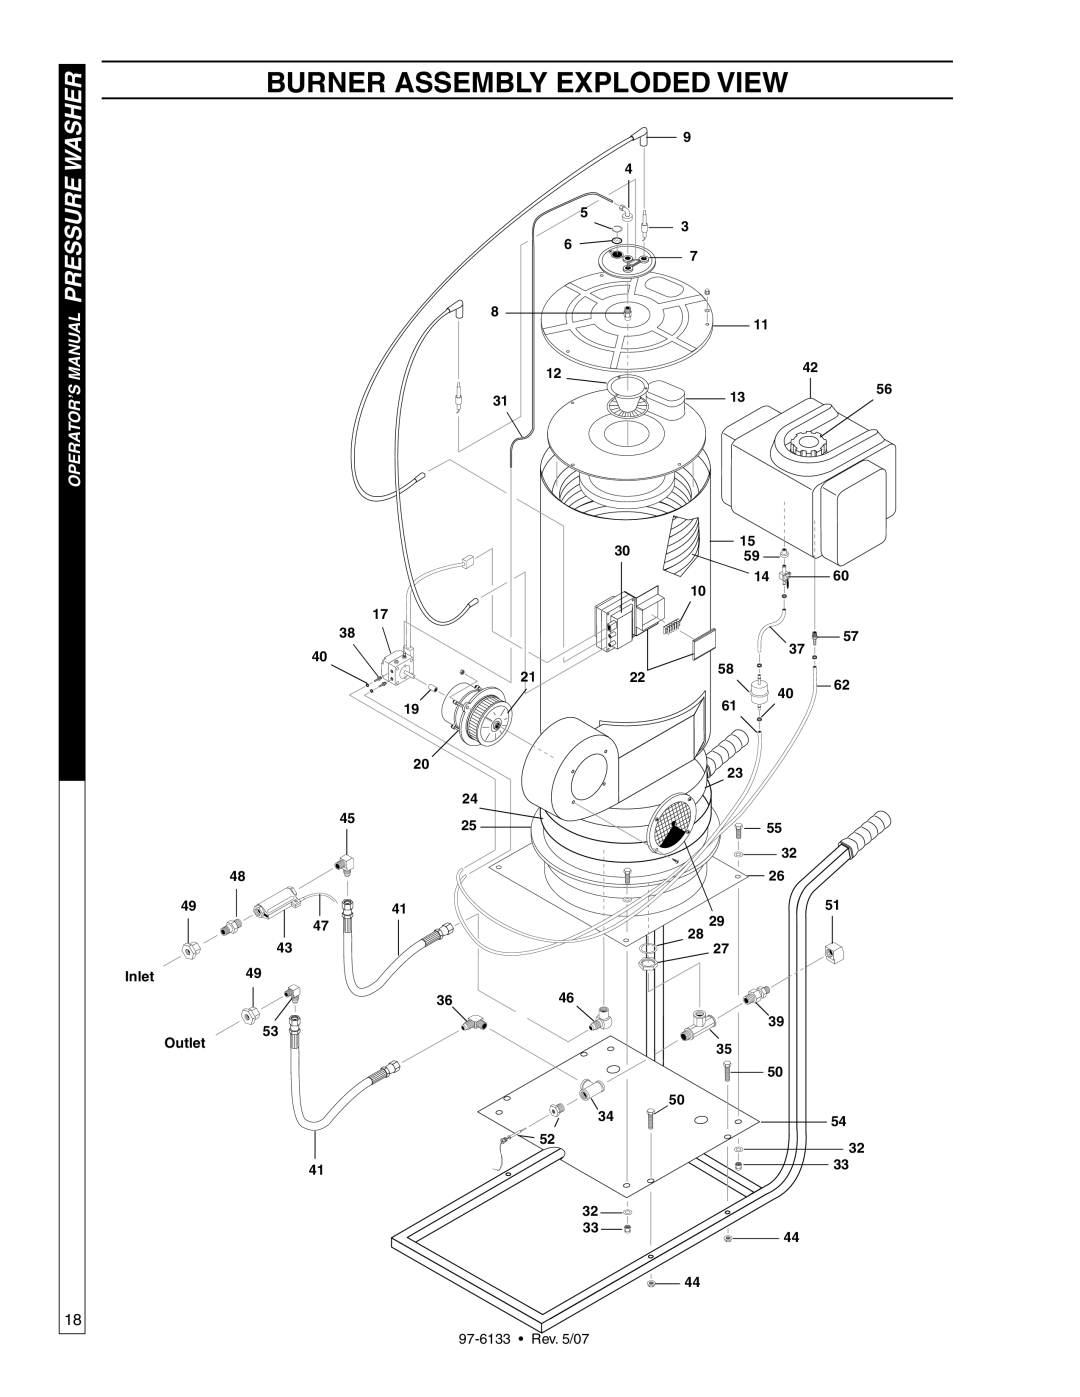 Shark HP-5030D Burner Assembly Exploded View, Washer, Operator’S Manual Pressure, 1356, 2122, 4525, Inlet49, Outlet, 3646 